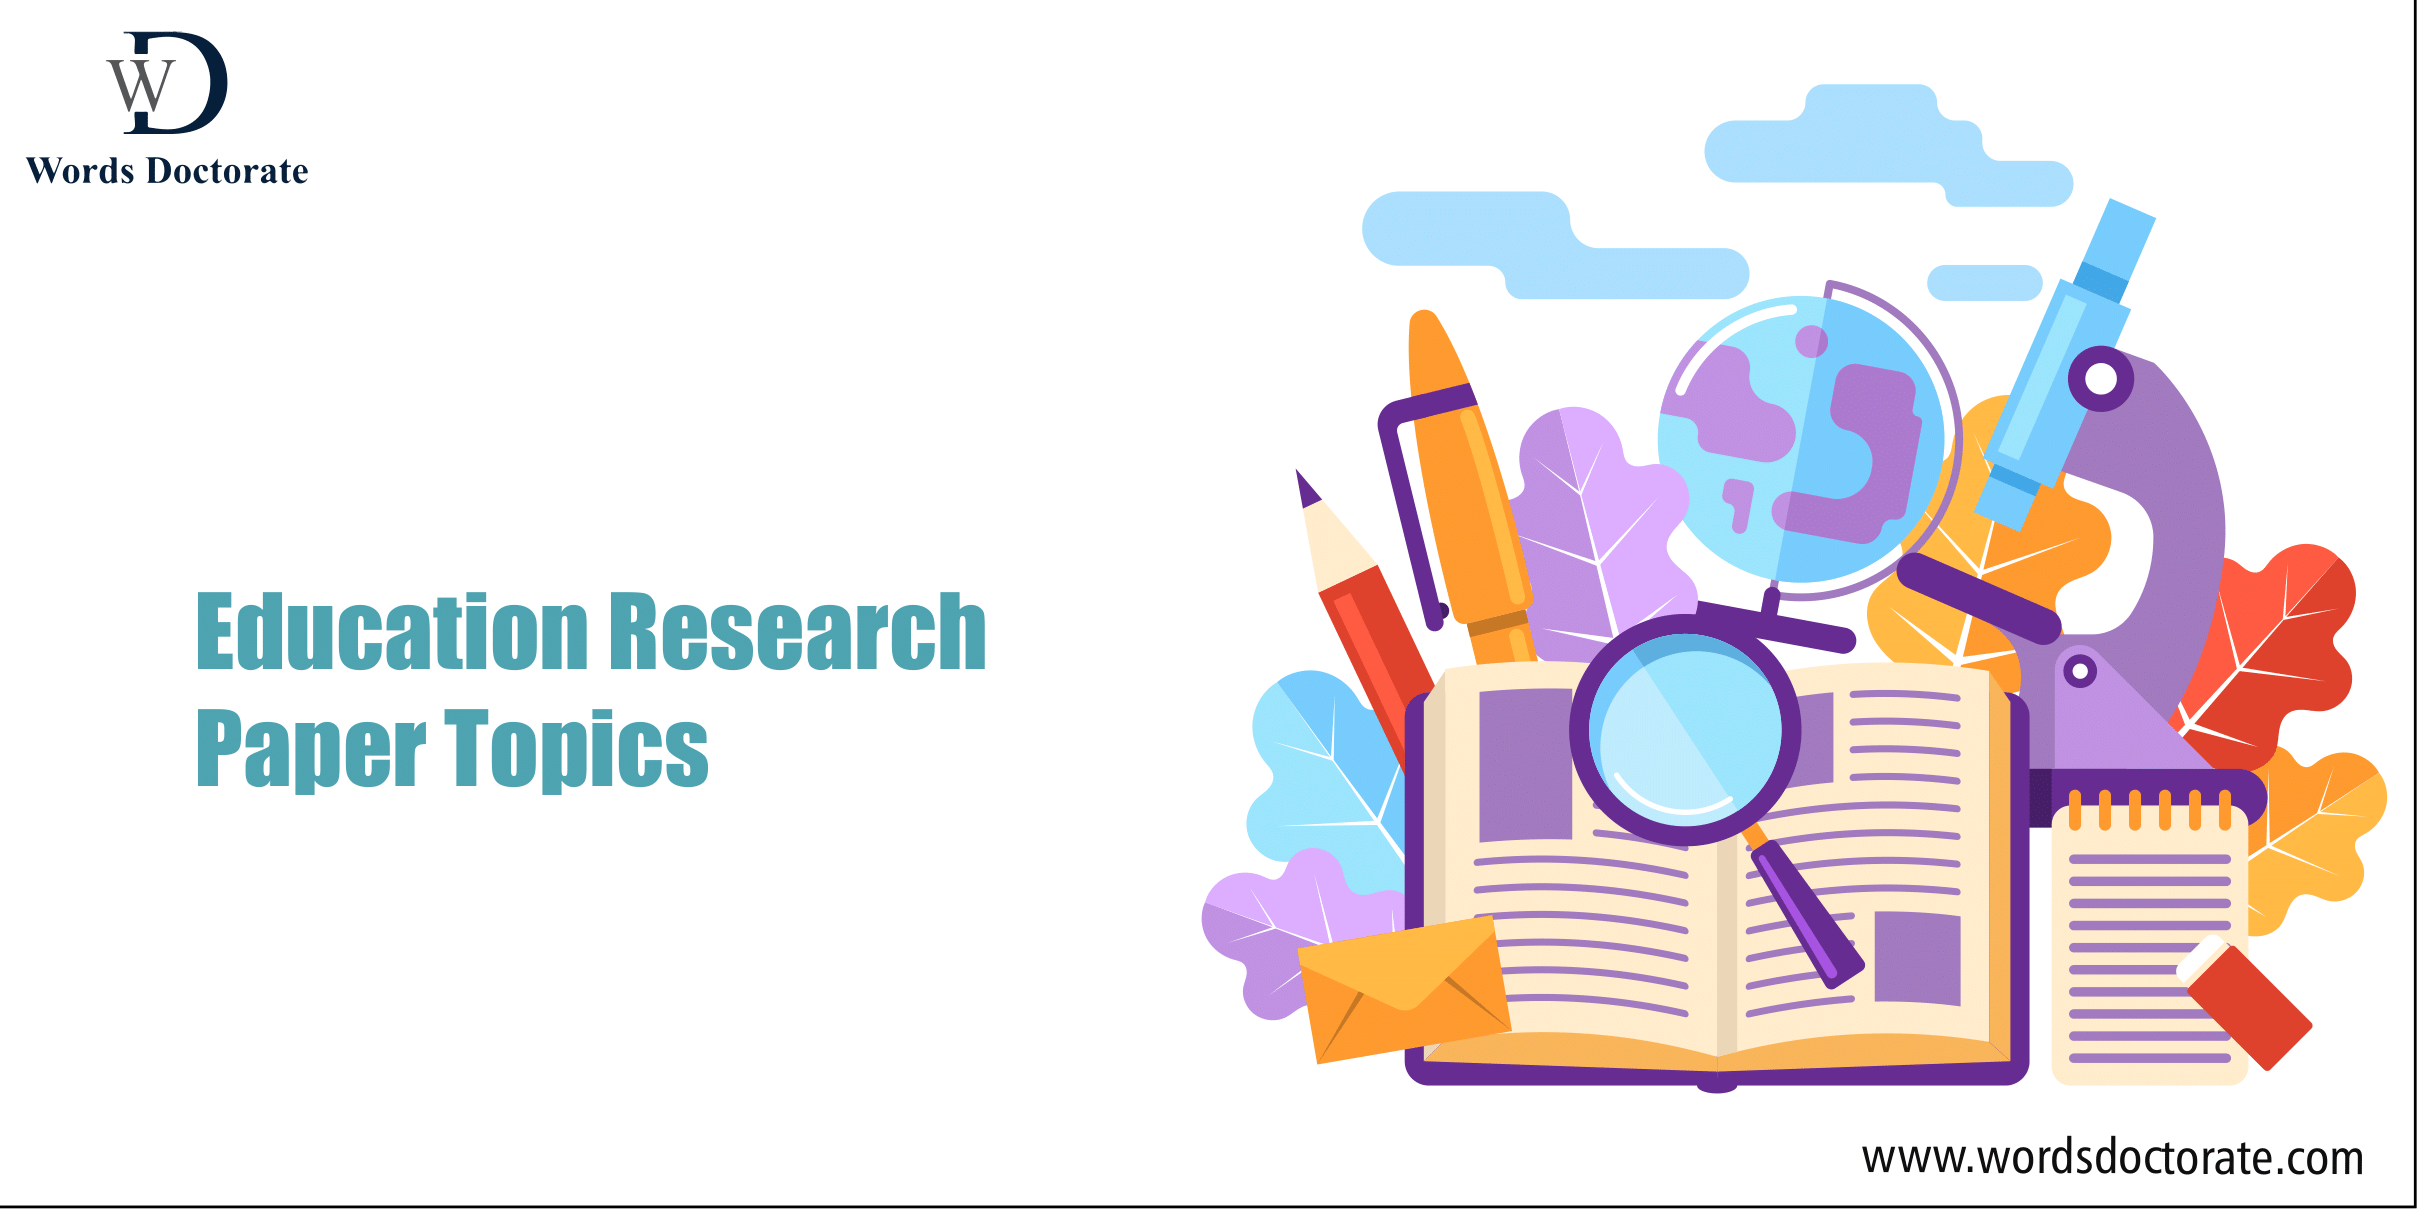 Education Research Paper Topics